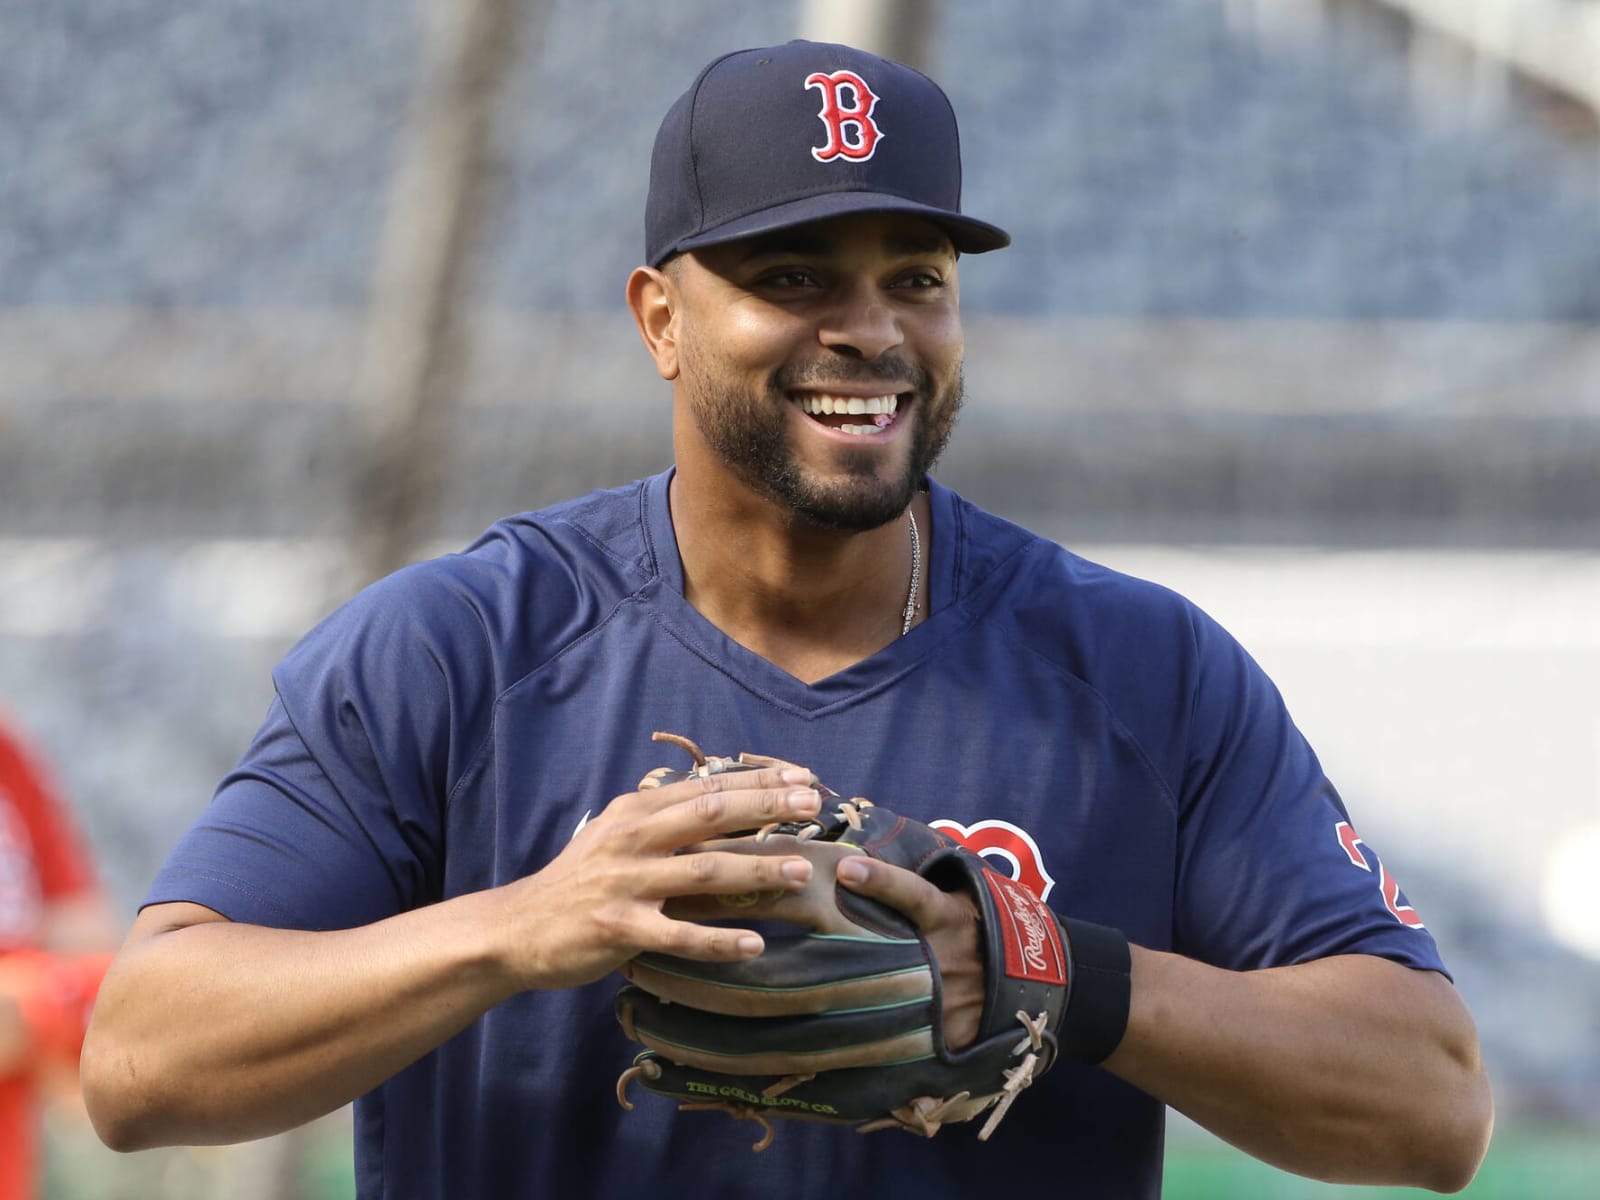 Xander Bogaerts introduced by Padres